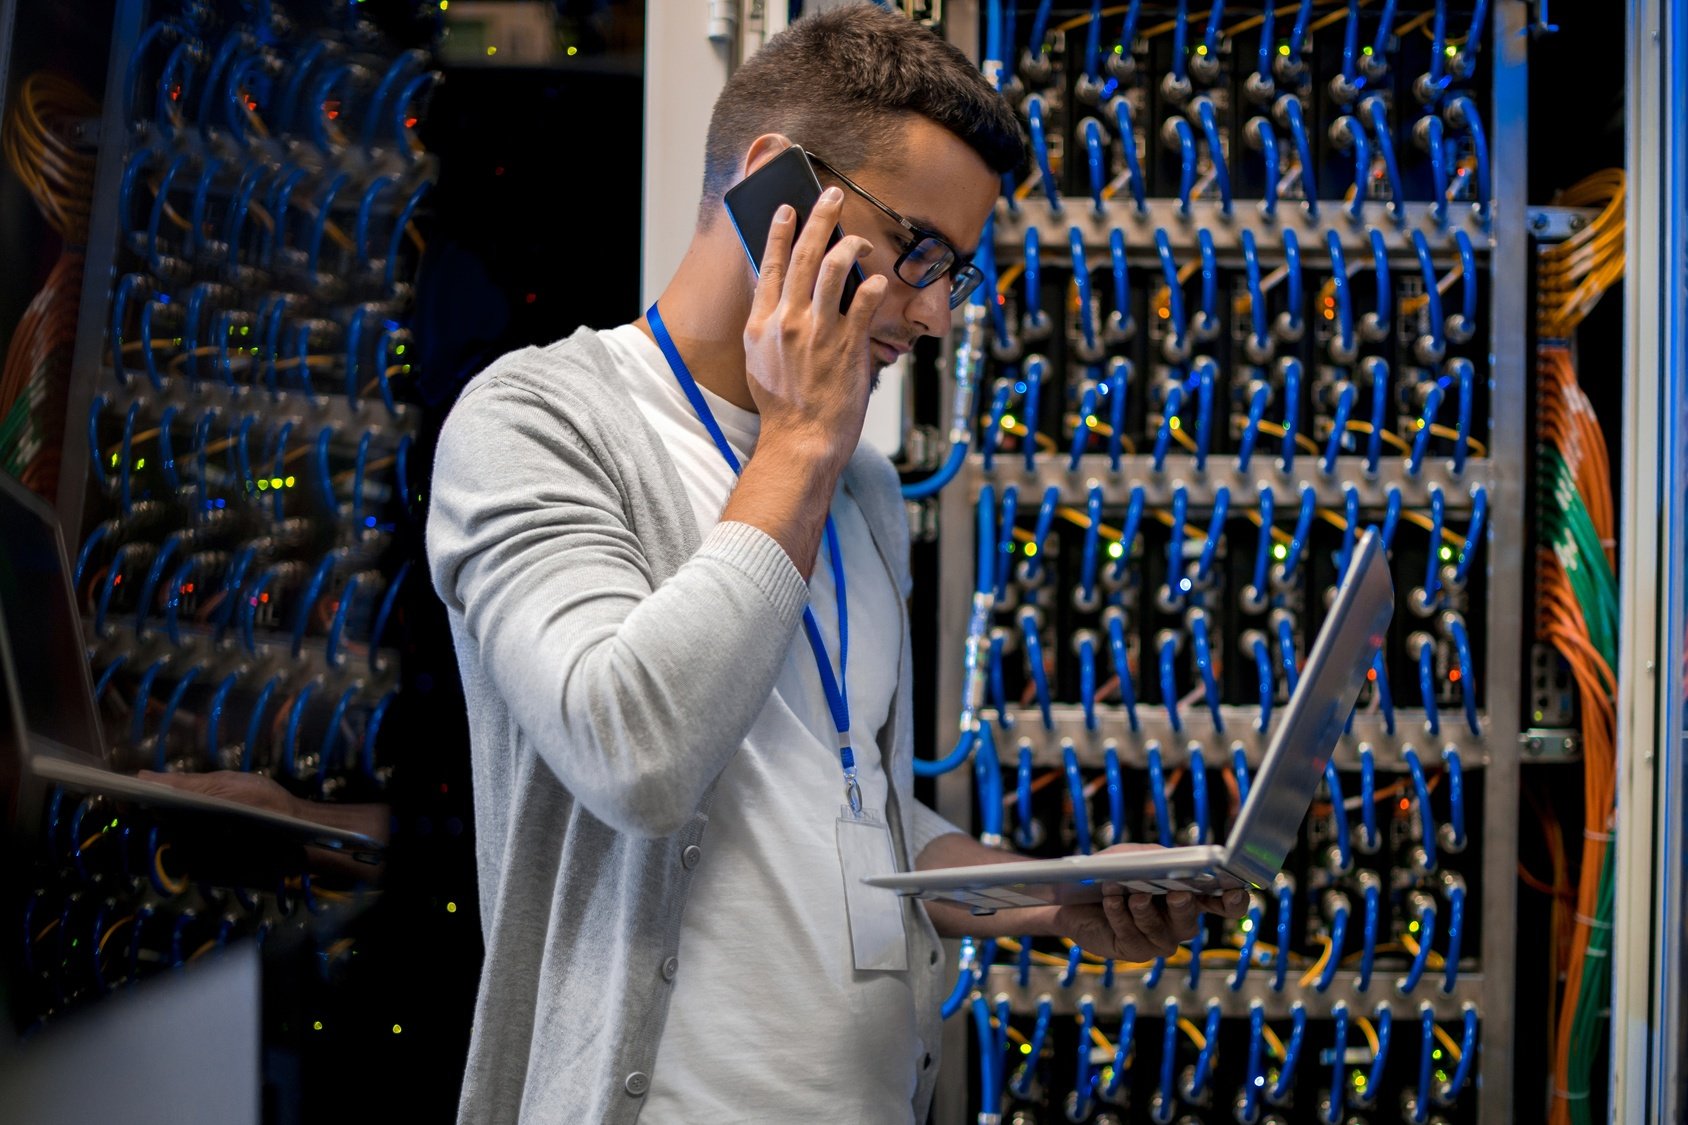 IT service technician in a Server Room on the phone holding a laptop